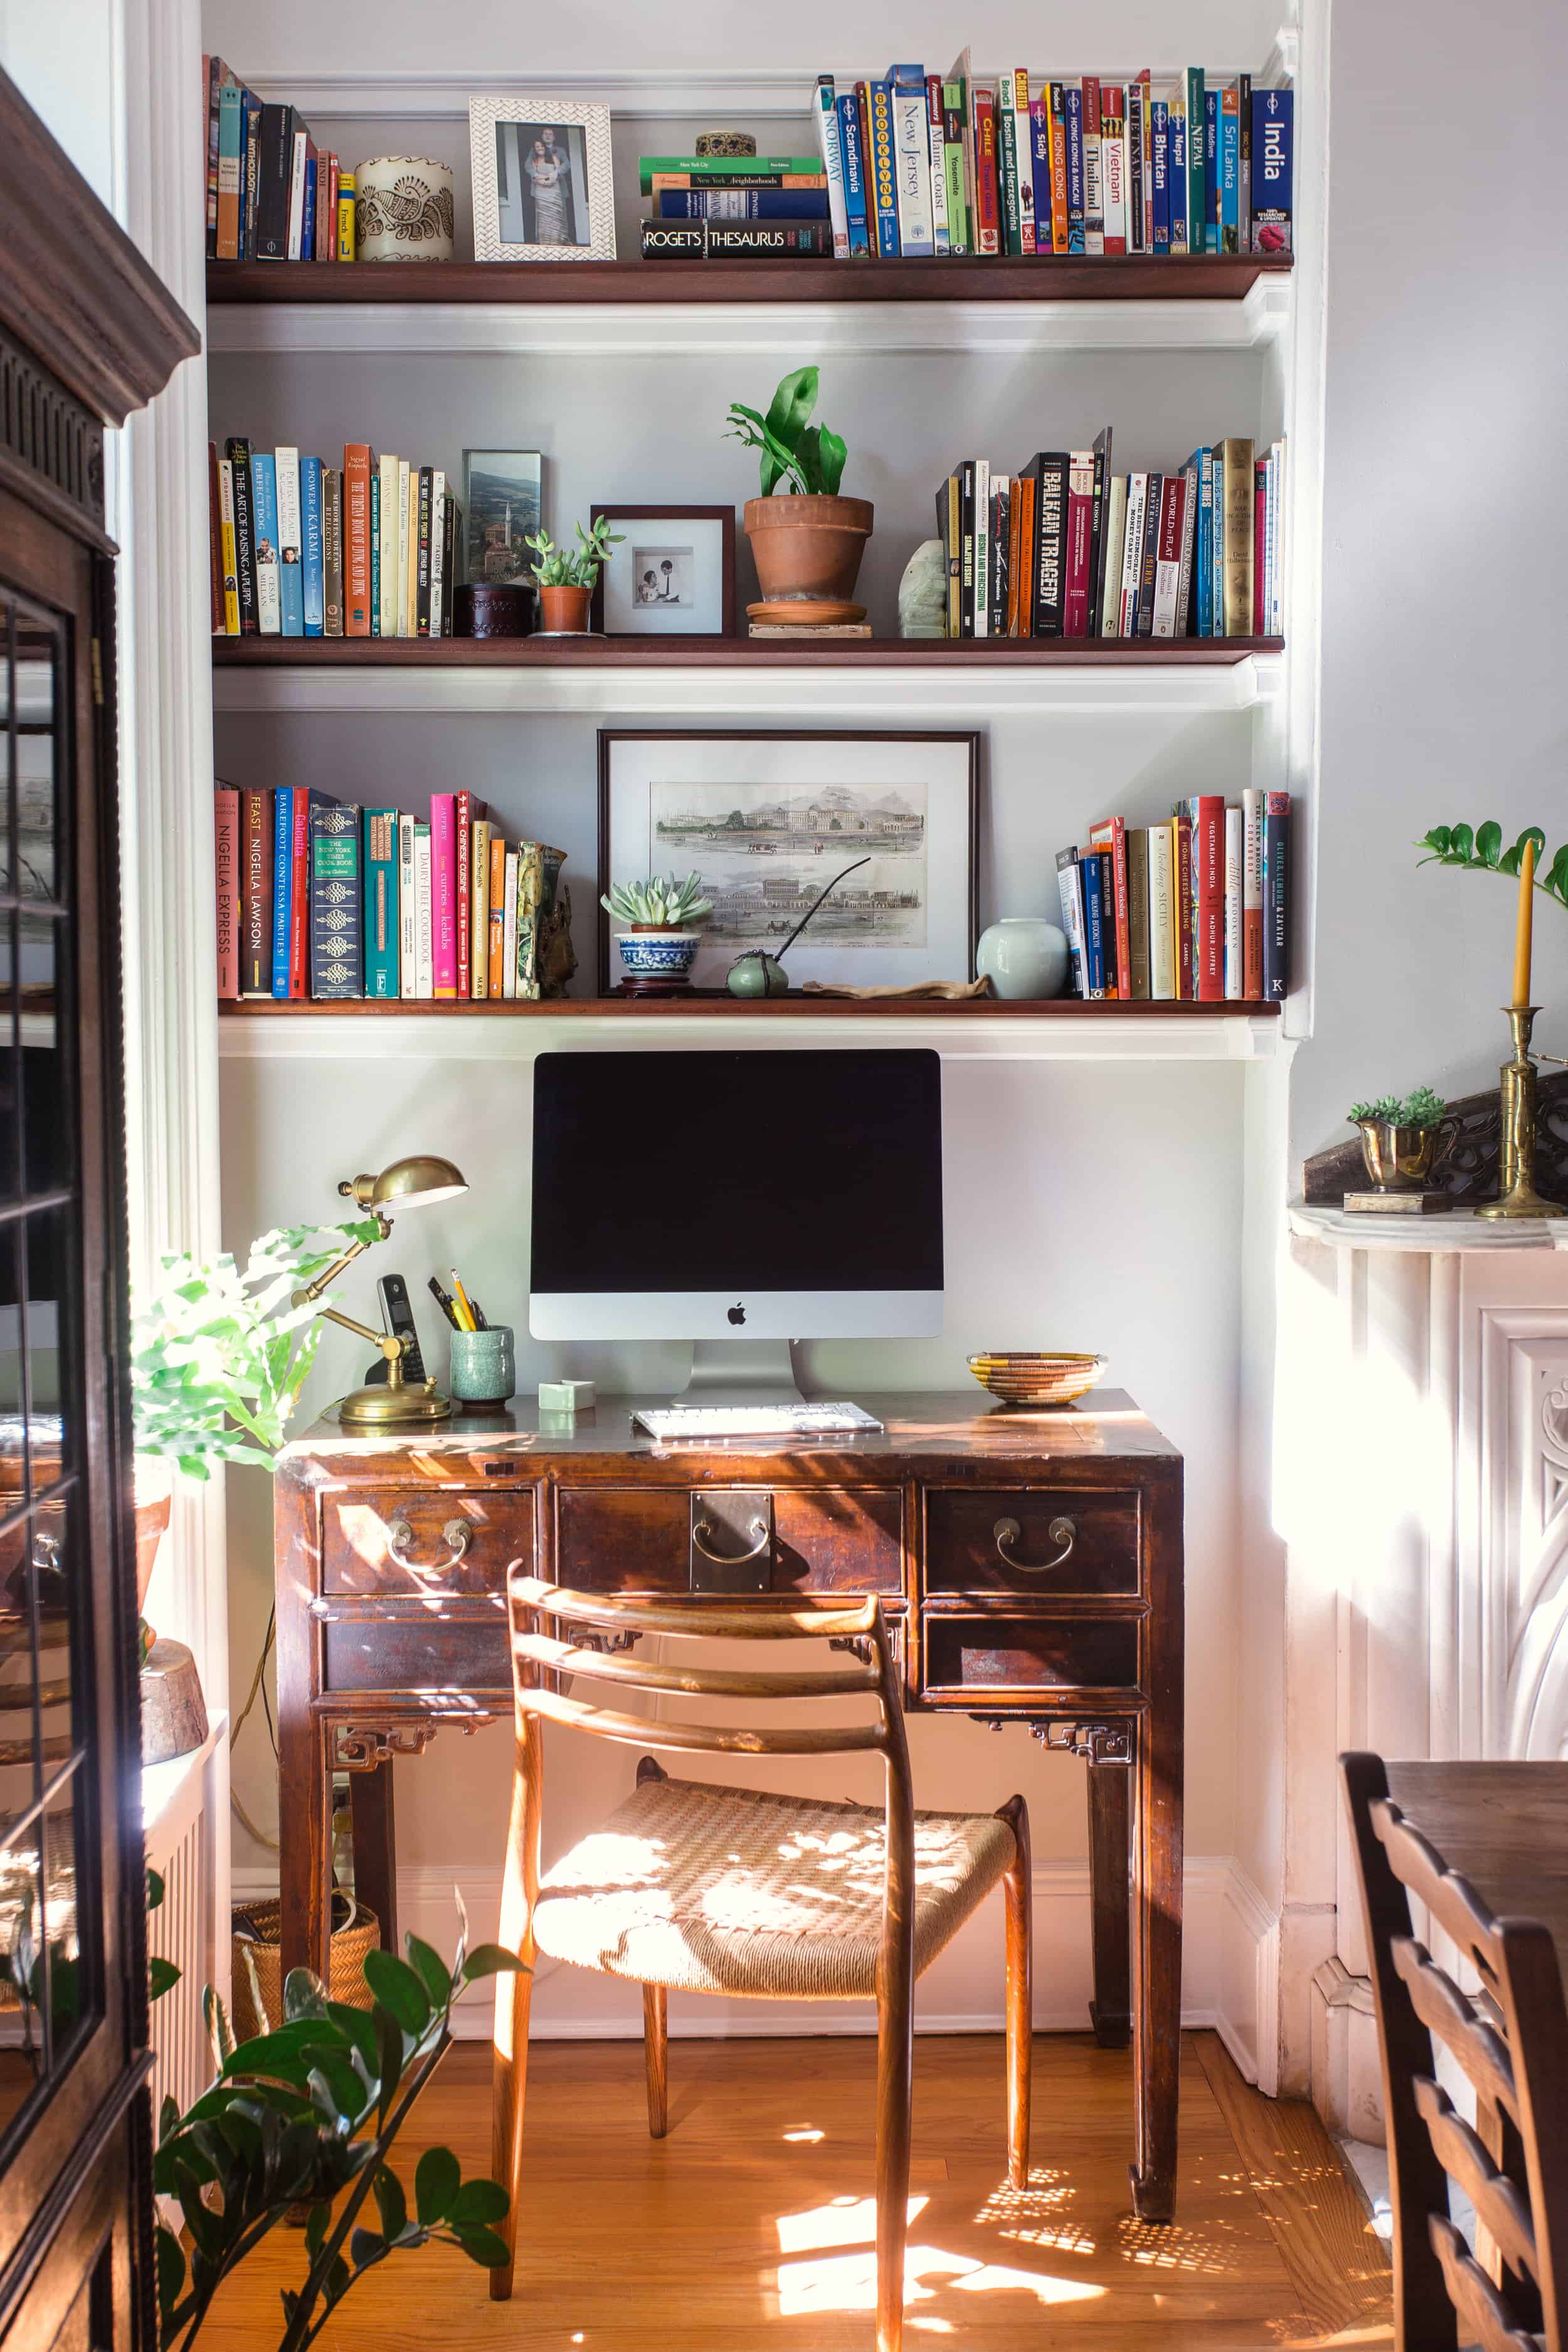 Small Home Office Ideas That Will Make You Want to Work Overtime #officeinteriordesign #smallhomeoffice #bohodecor